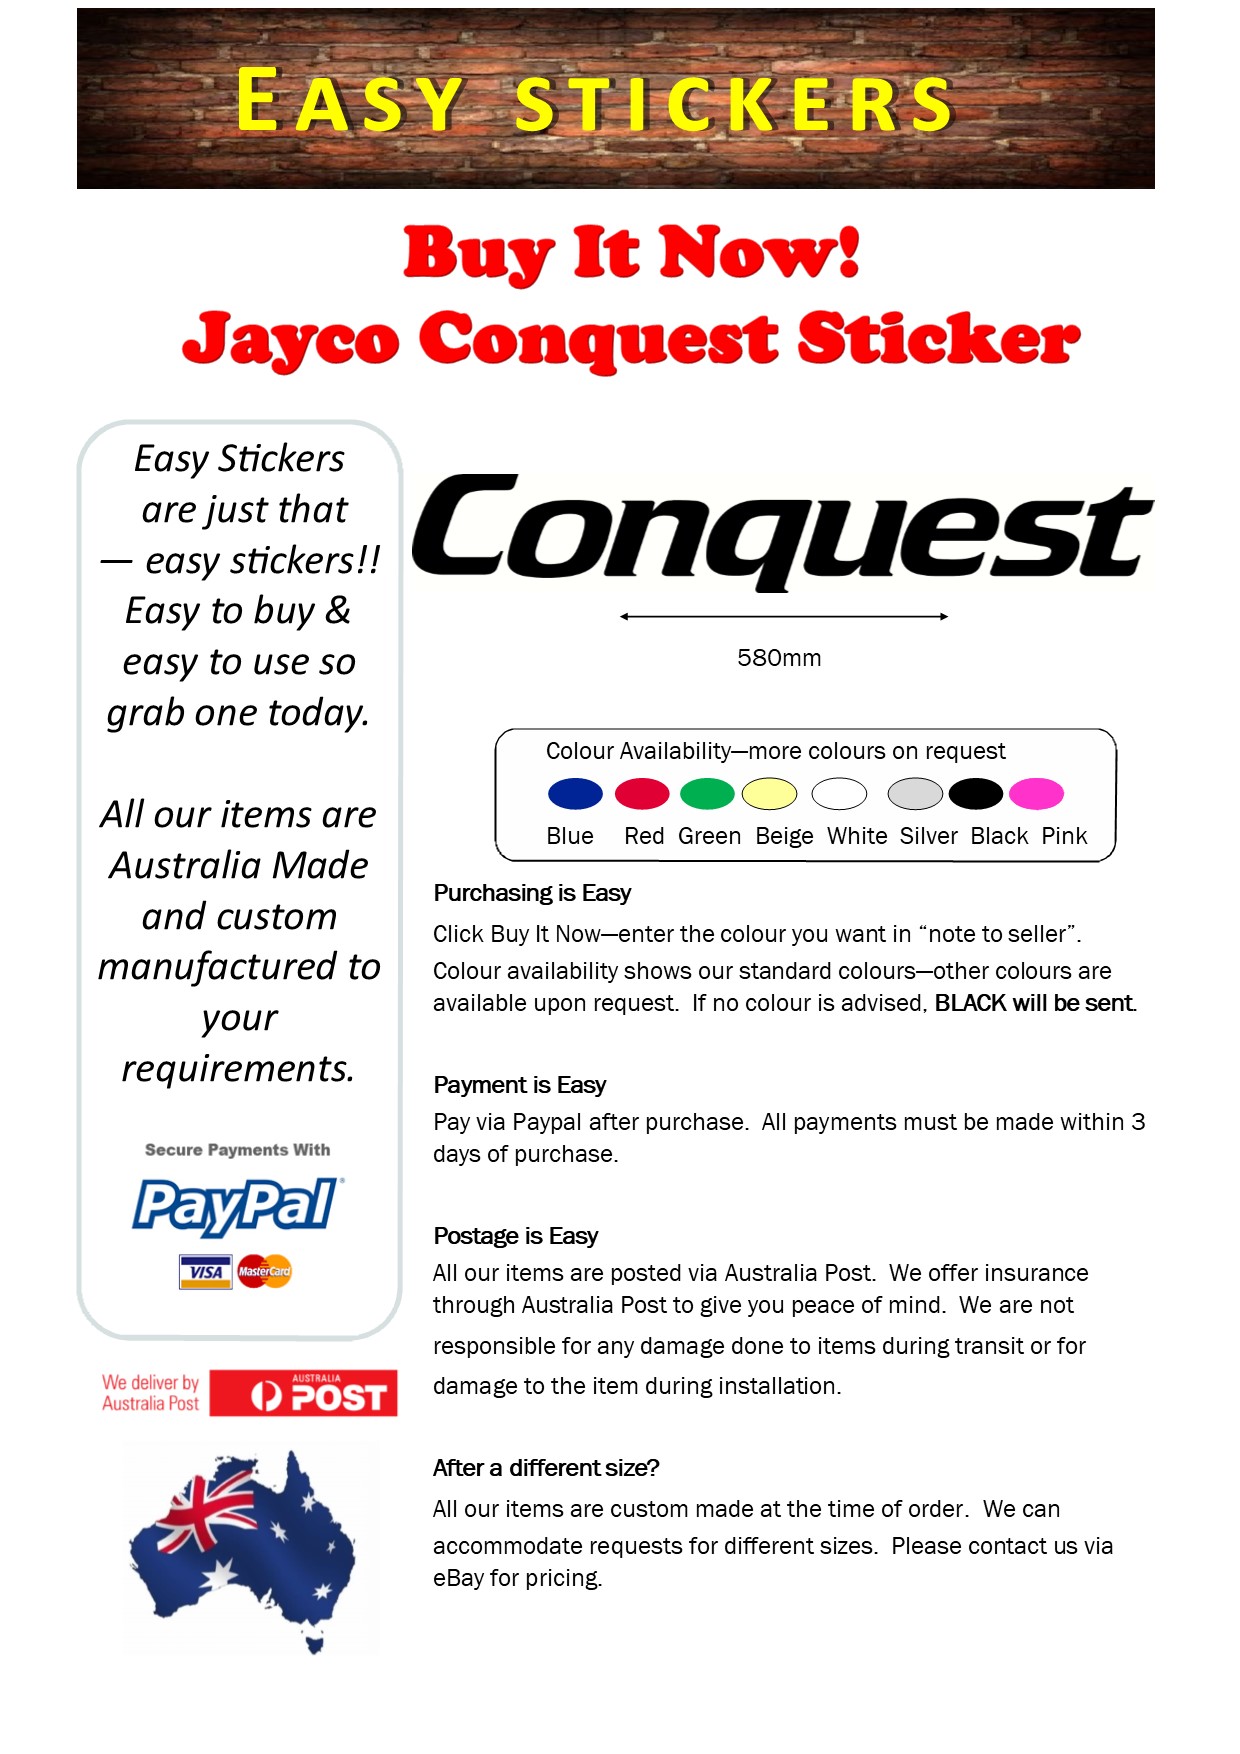 Ebay Template  580mm Jayco Conquest.jpg  by easystickers